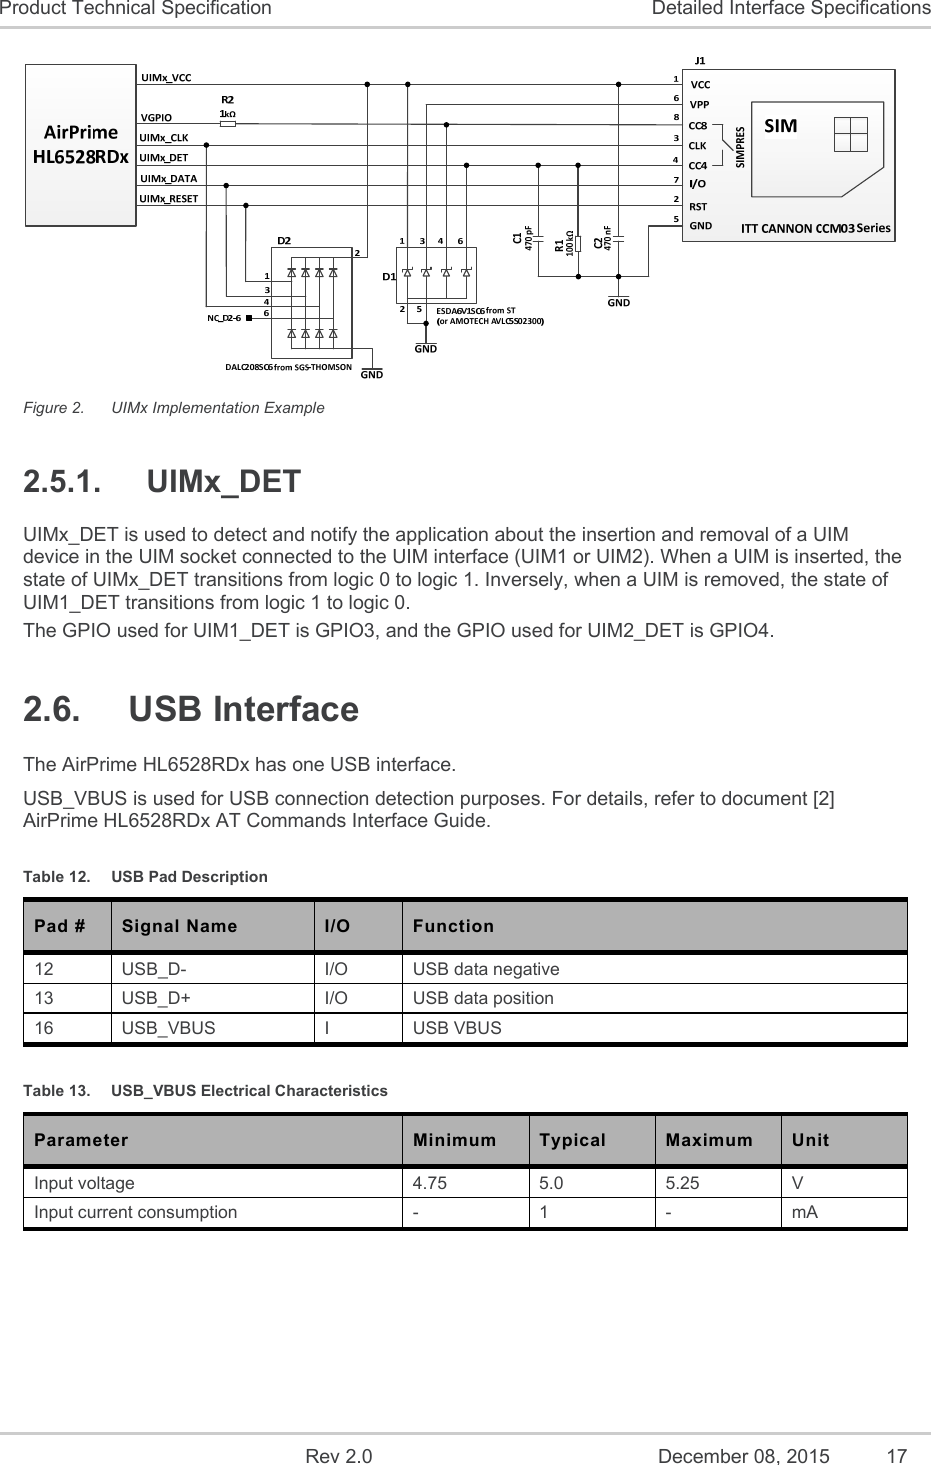    Rev 2.0  December 08, 2015  17 Product Technical Specification  Detailed Interface Specifications  Figure 2.  UIMx Implementation Example 2.5.1.  UIMx_DET UIMx_DET is used to detect and notify the application about the insertion and removal of a UIM device in the UIM socket connected to the UIM interface (UIM1 or UIM2). When a UIM is inserted, the state of UIMx_DET transitions from logic 0 to logic 1. Inversely, when a UIM is removed, the state of UIM1_DET transitions from logic 1 to logic 0. The GPIO used for UIM1_DET is GPIO3, and the GPIO used for UIM2_DET is GPIO4. 2.6.  USB Interface The AirPrime HL6528RDx has one USB interface. USB_VBUS is used for USB connection detection purposes. For details, refer to document [2] AirPrime HL6528RDx AT Commands Interface Guide. Table 12.  USB Pad Description Pad #  Signal Name  I/O  Function 12  USB_D-  I/O  USB data negative 13  USB_D+  I/O  USB data position 16  USB_VBUS  I  USB VBUS Table 13.  USB_VBUS Electrical Characteristics Parameter  Minimum  Typical  Maximum  Unit Input voltage  4.75  5.0  5.25  V Input current consumption  -  1  -  mA 